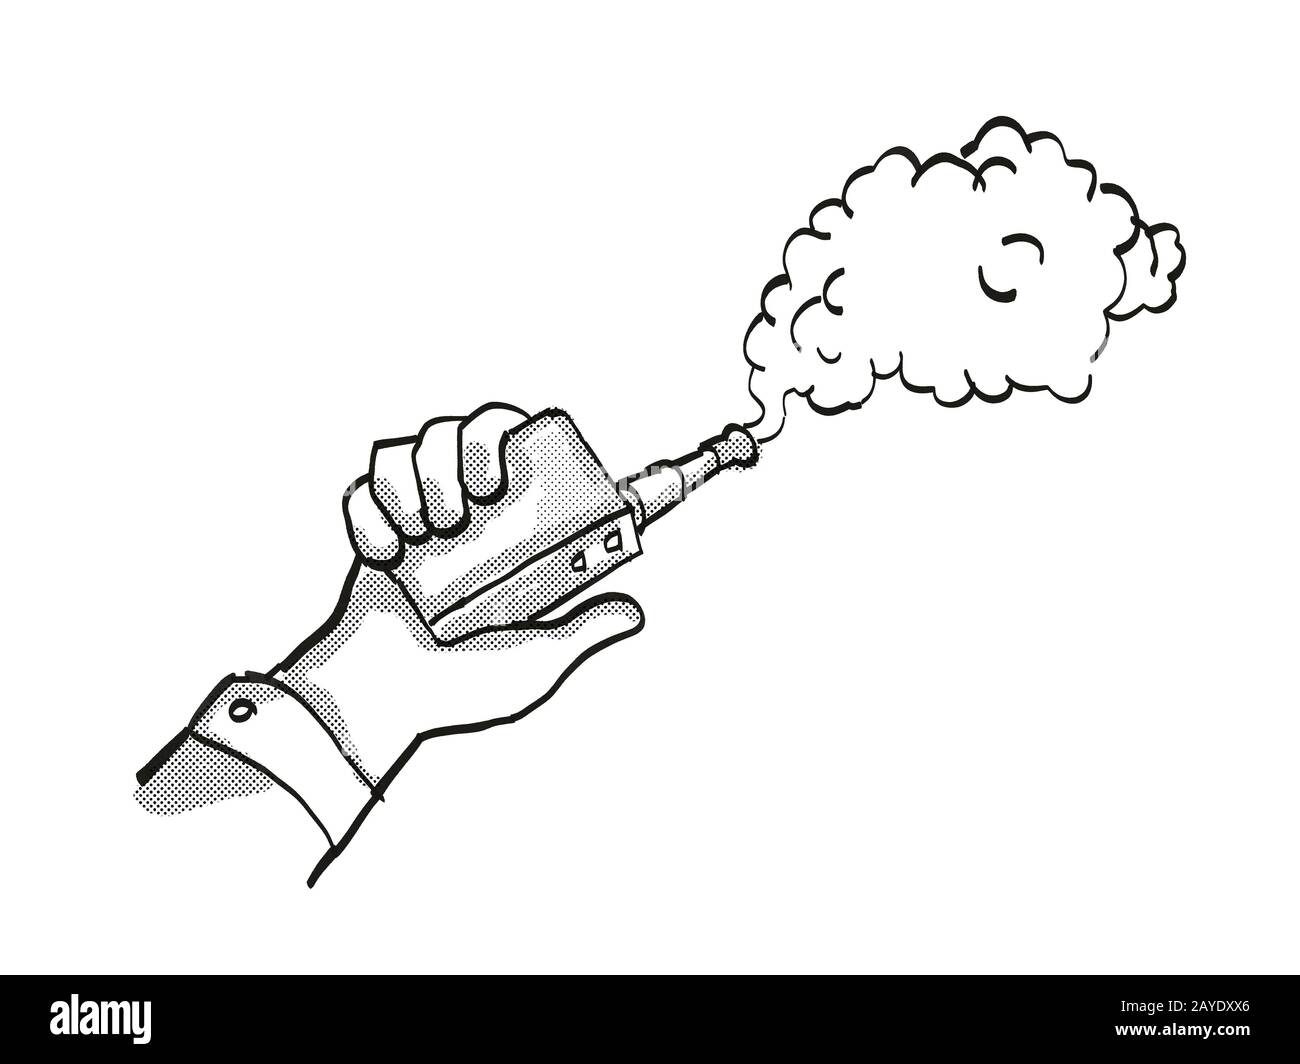 Hand Cigarette Drawing High Resolution Stock Photography And Images Alamy Choose from over a million free vectors, clipart graphics, vector art images, design templates, and illustrations created by artists worldwide! https www alamy com hand holding vape electronic cigarette tattoo image343899198 html